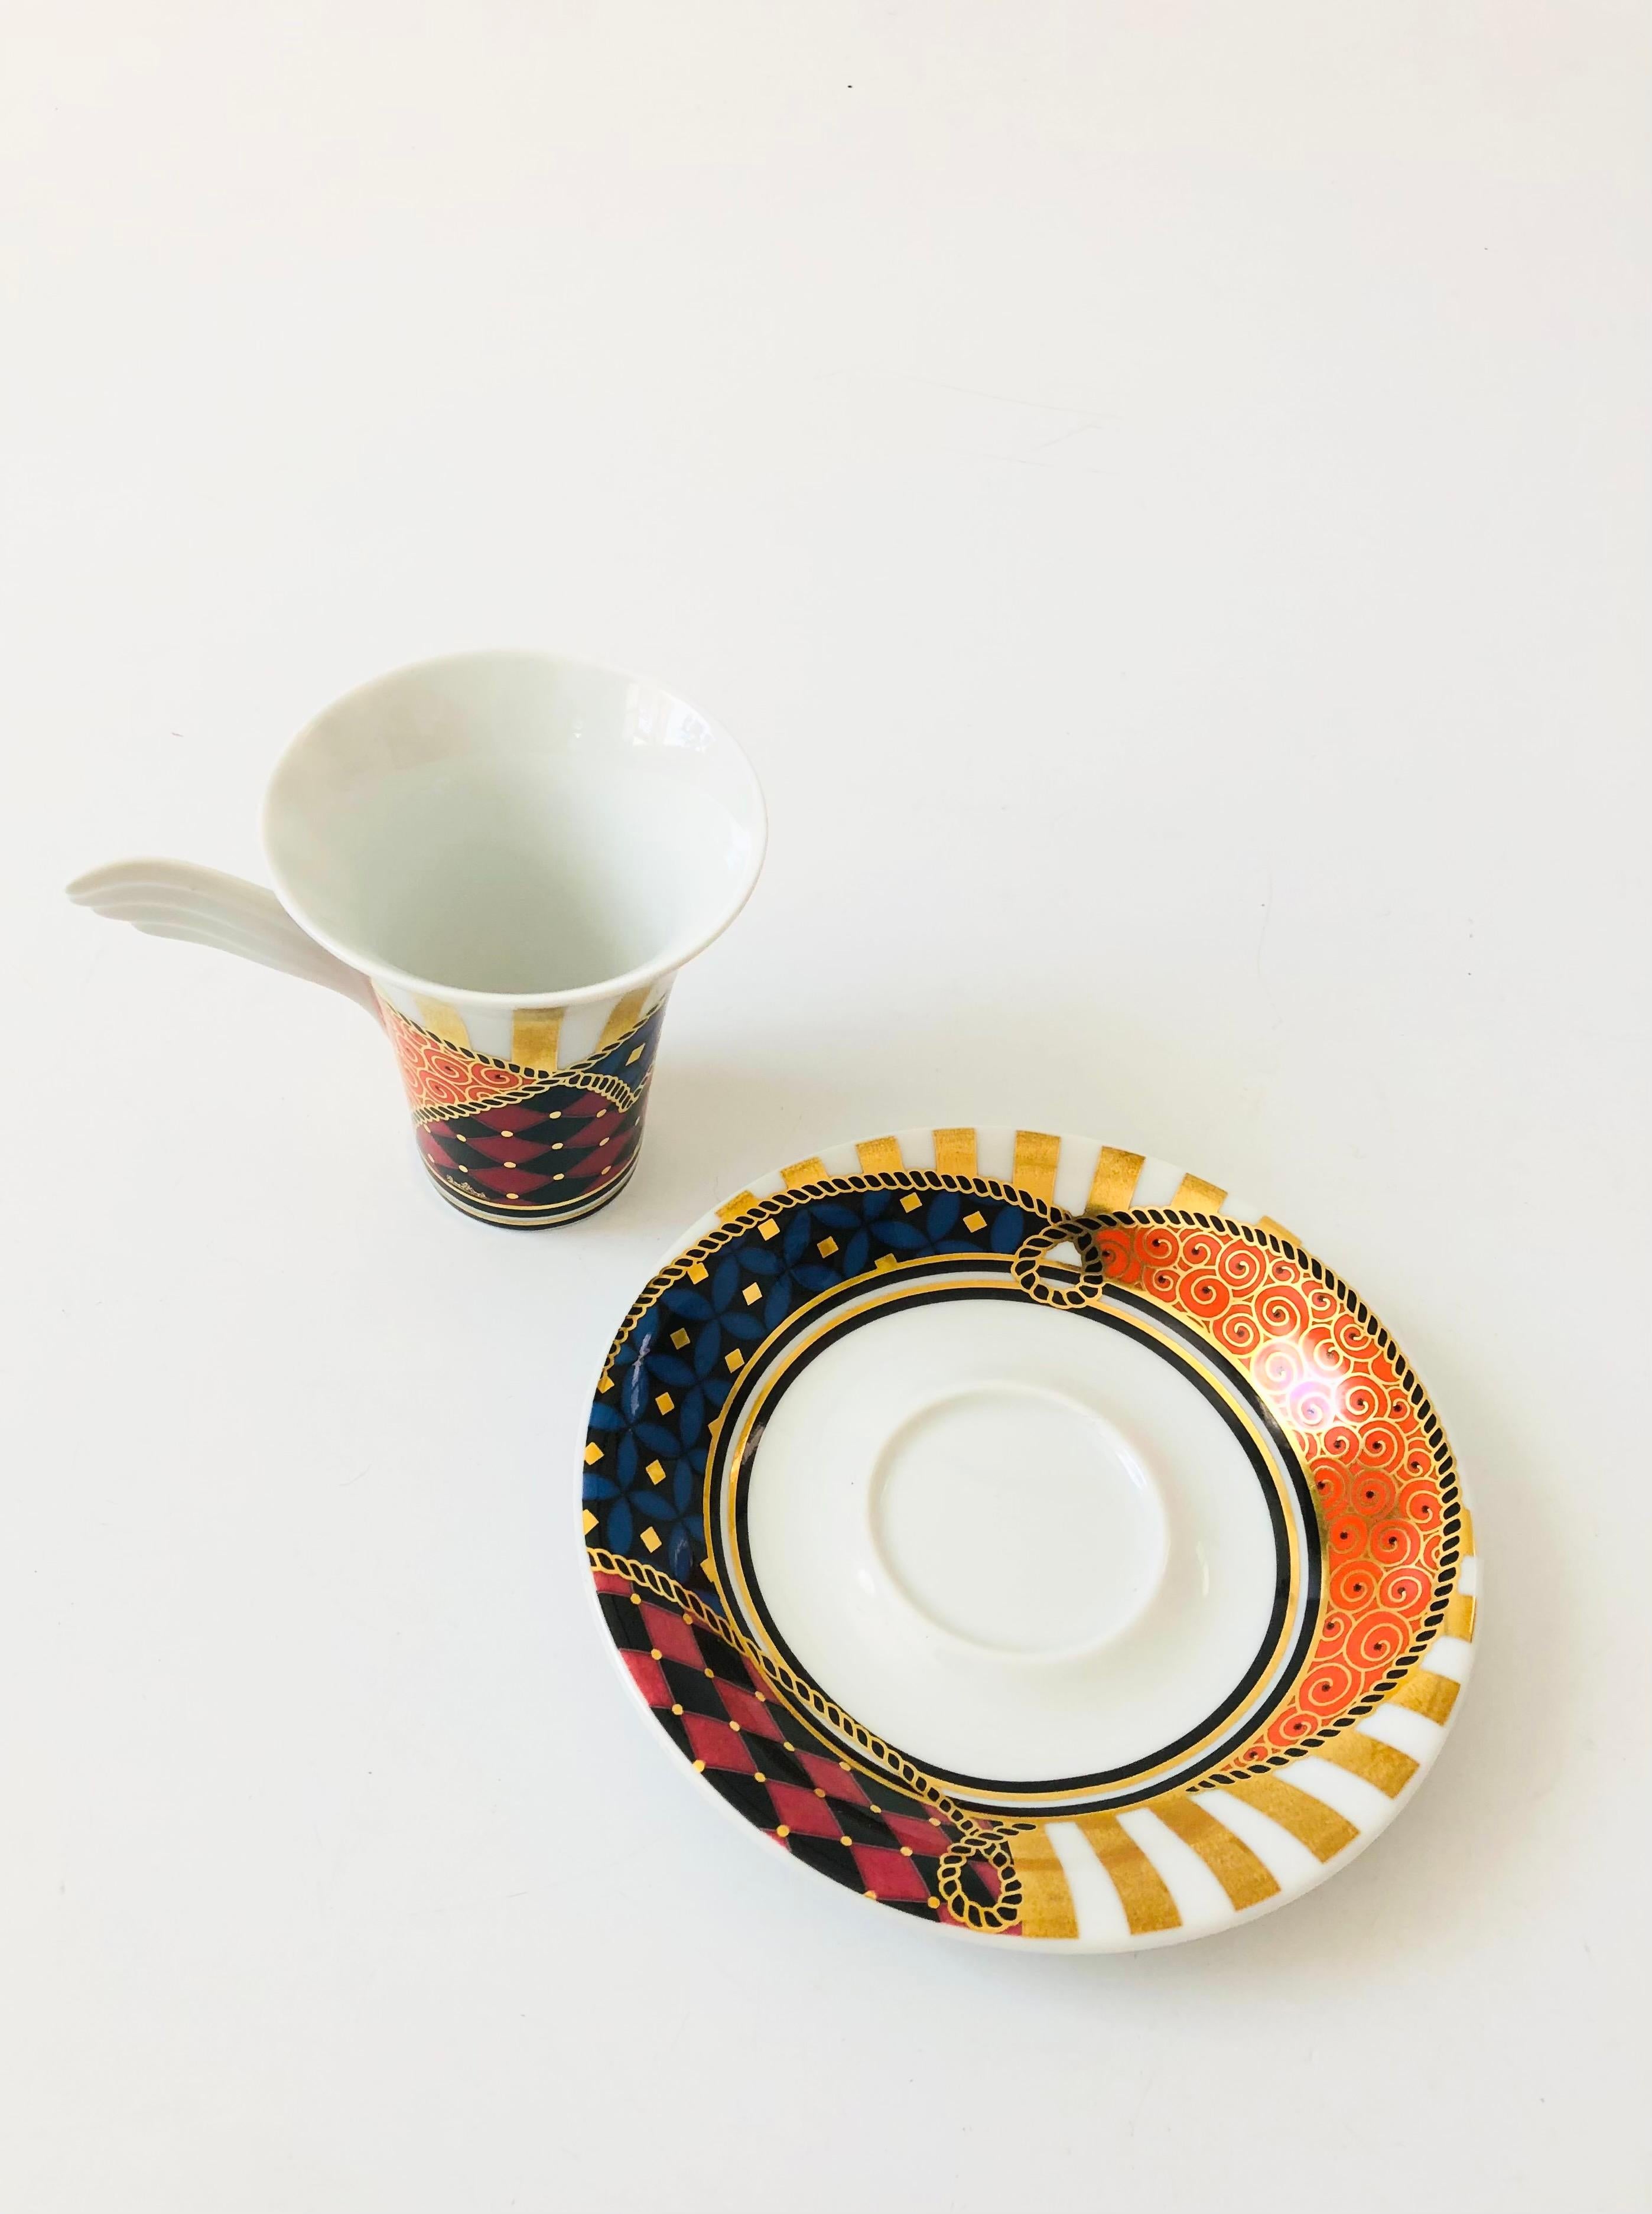 Rosenthal Mythos Collectible Espresso Cup and Saucer Set NR 4 by Yang In Good Condition For Sale In Vallejo, CA